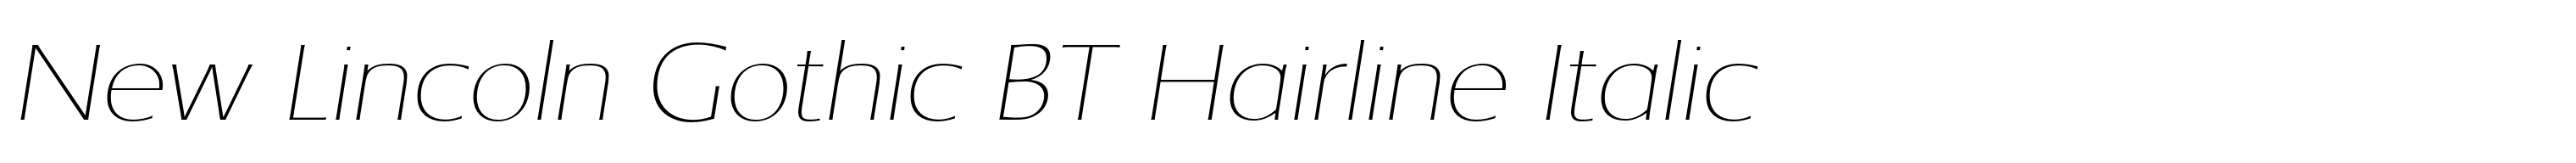 New Lincoln Gothic BT Hairline Italic